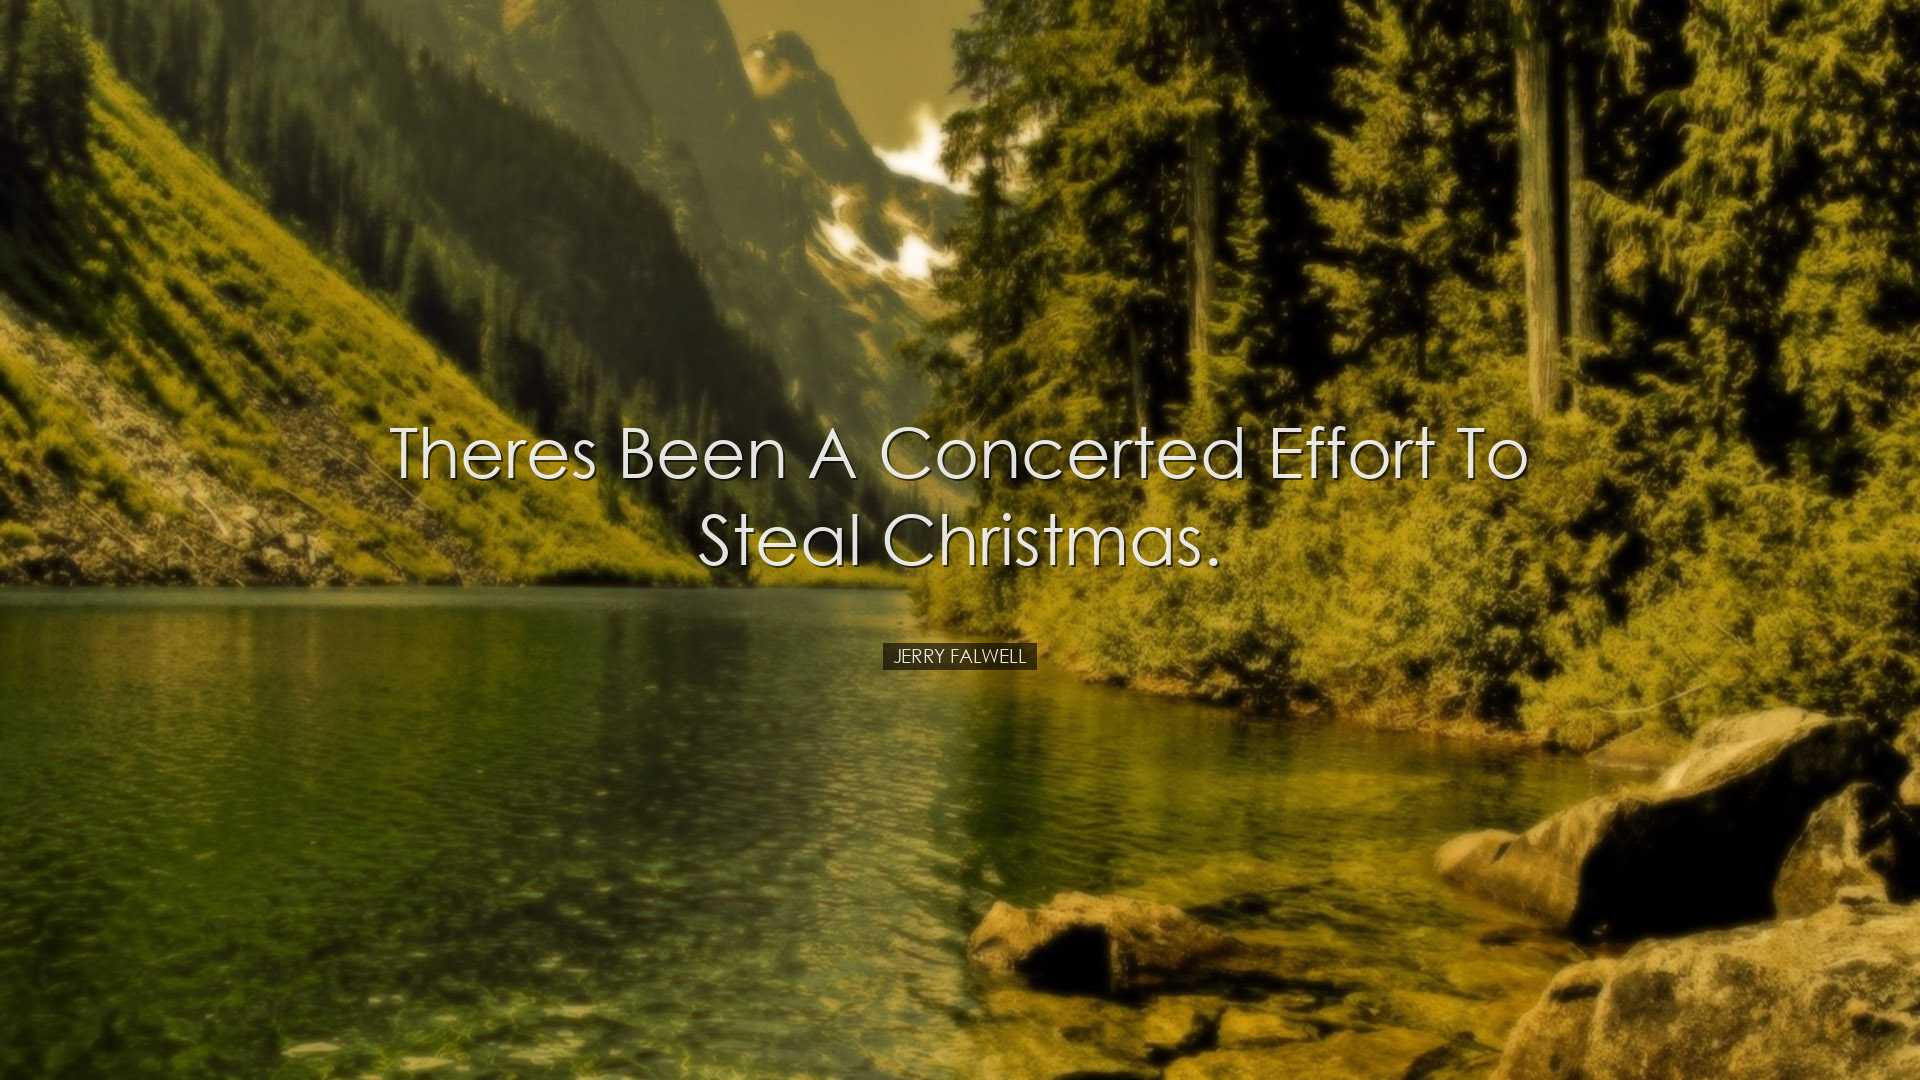 Theres been a concerted effort to steal Christmas. - Jerry Falwell